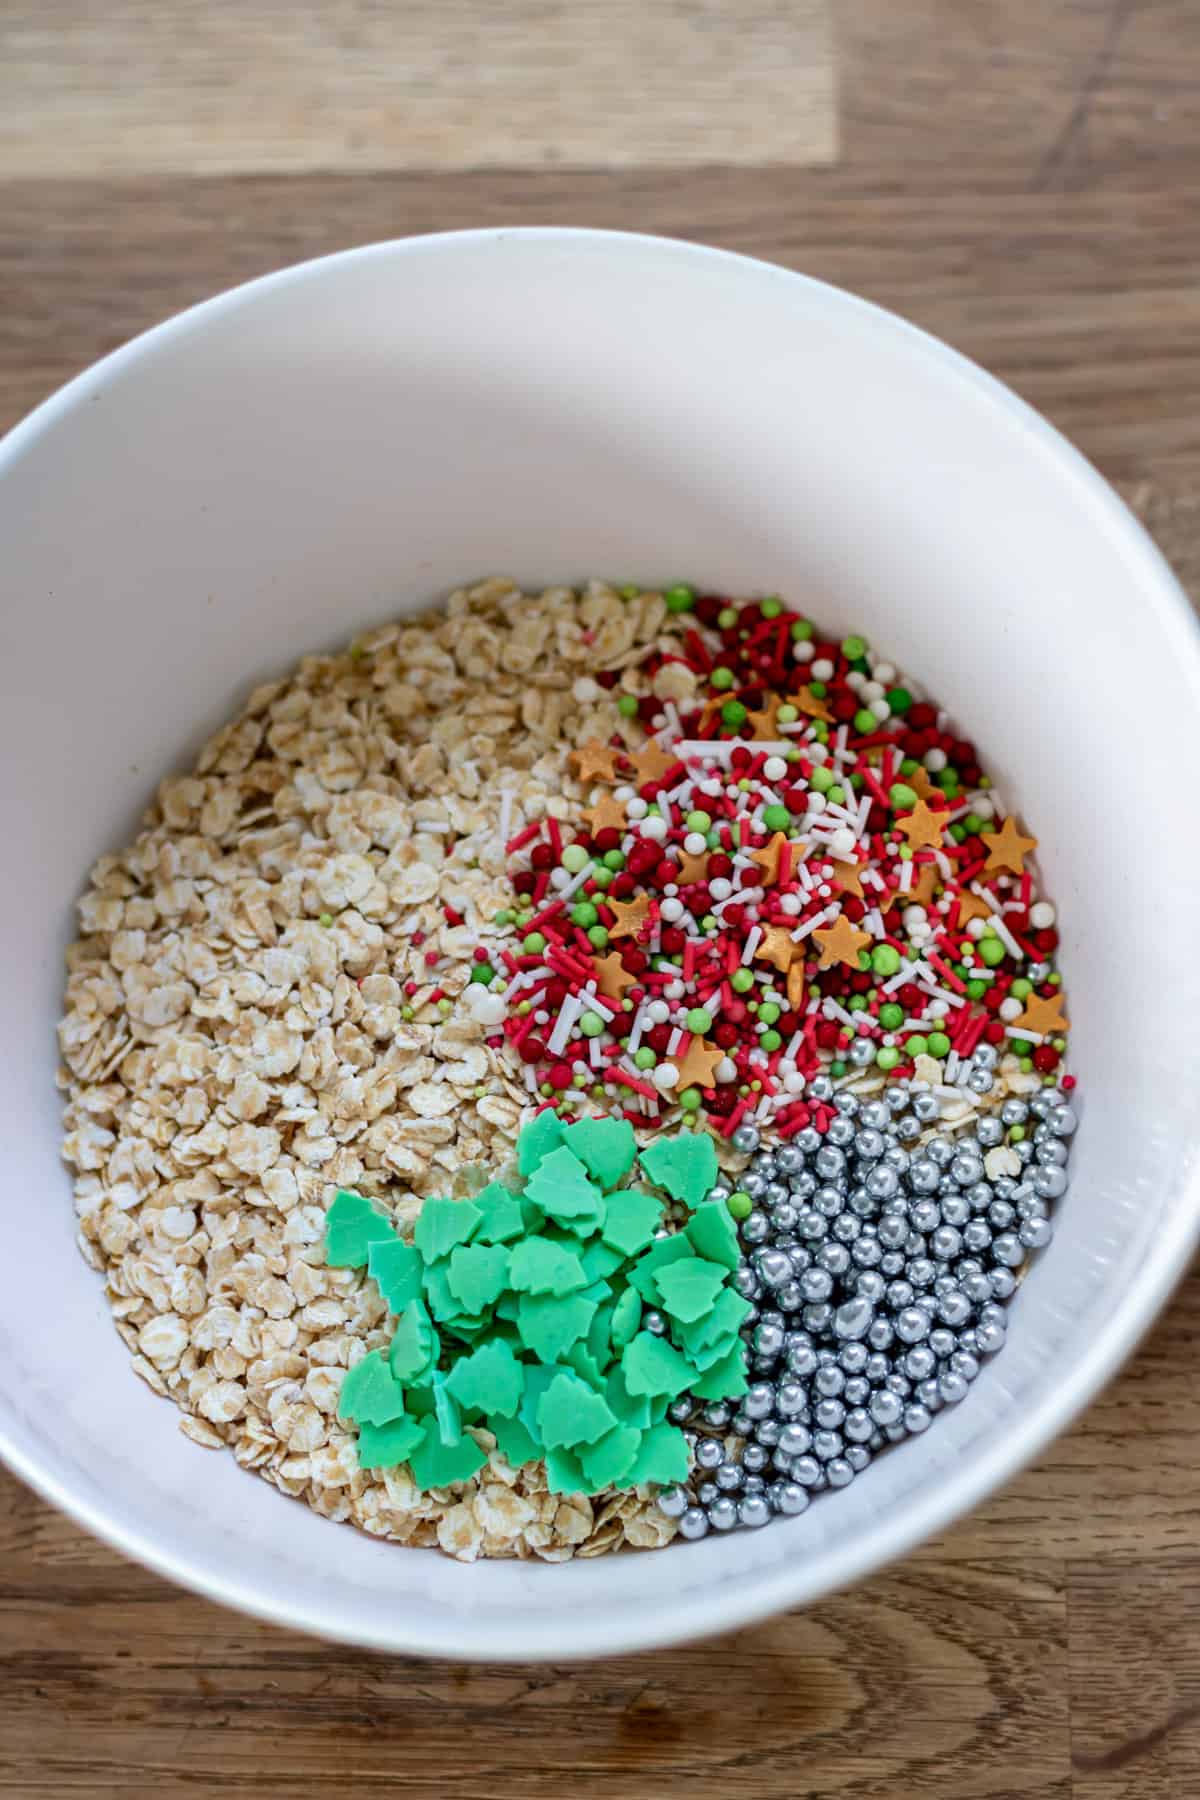 Ingredients for magical reindeer food in a bowl - oats and sprinkles.